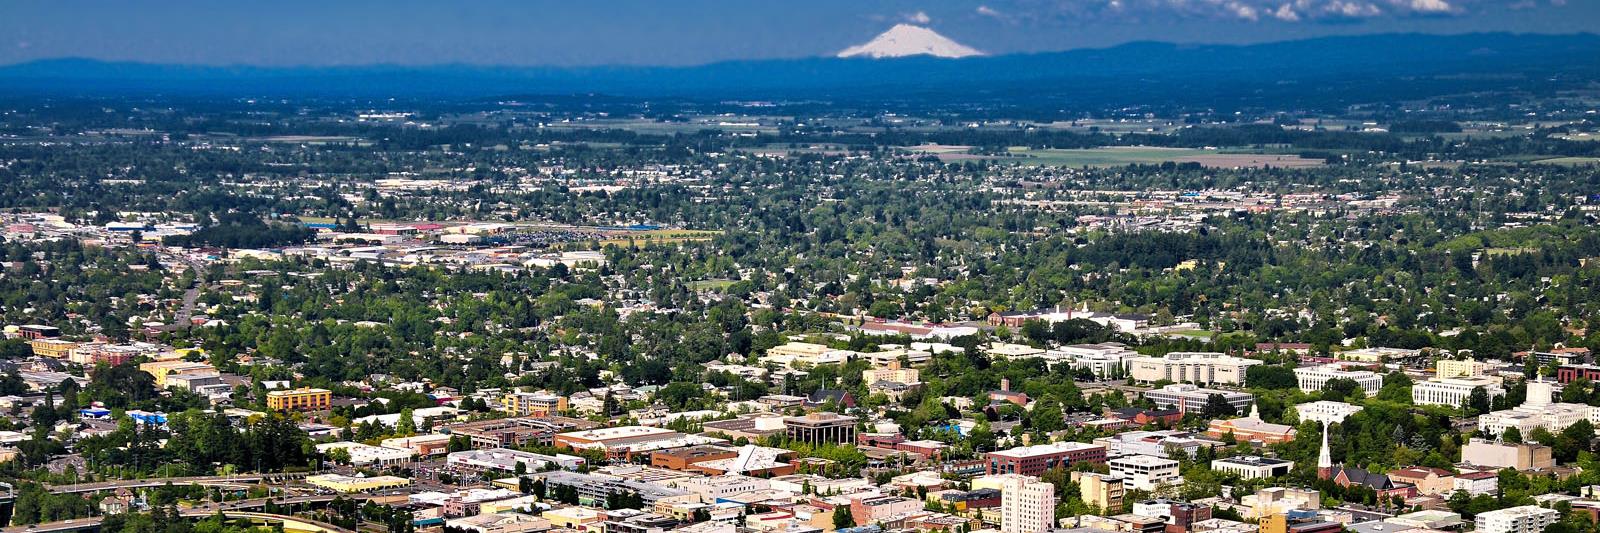 salem-downtown-with-mountains-aerial_web_1600x533_color